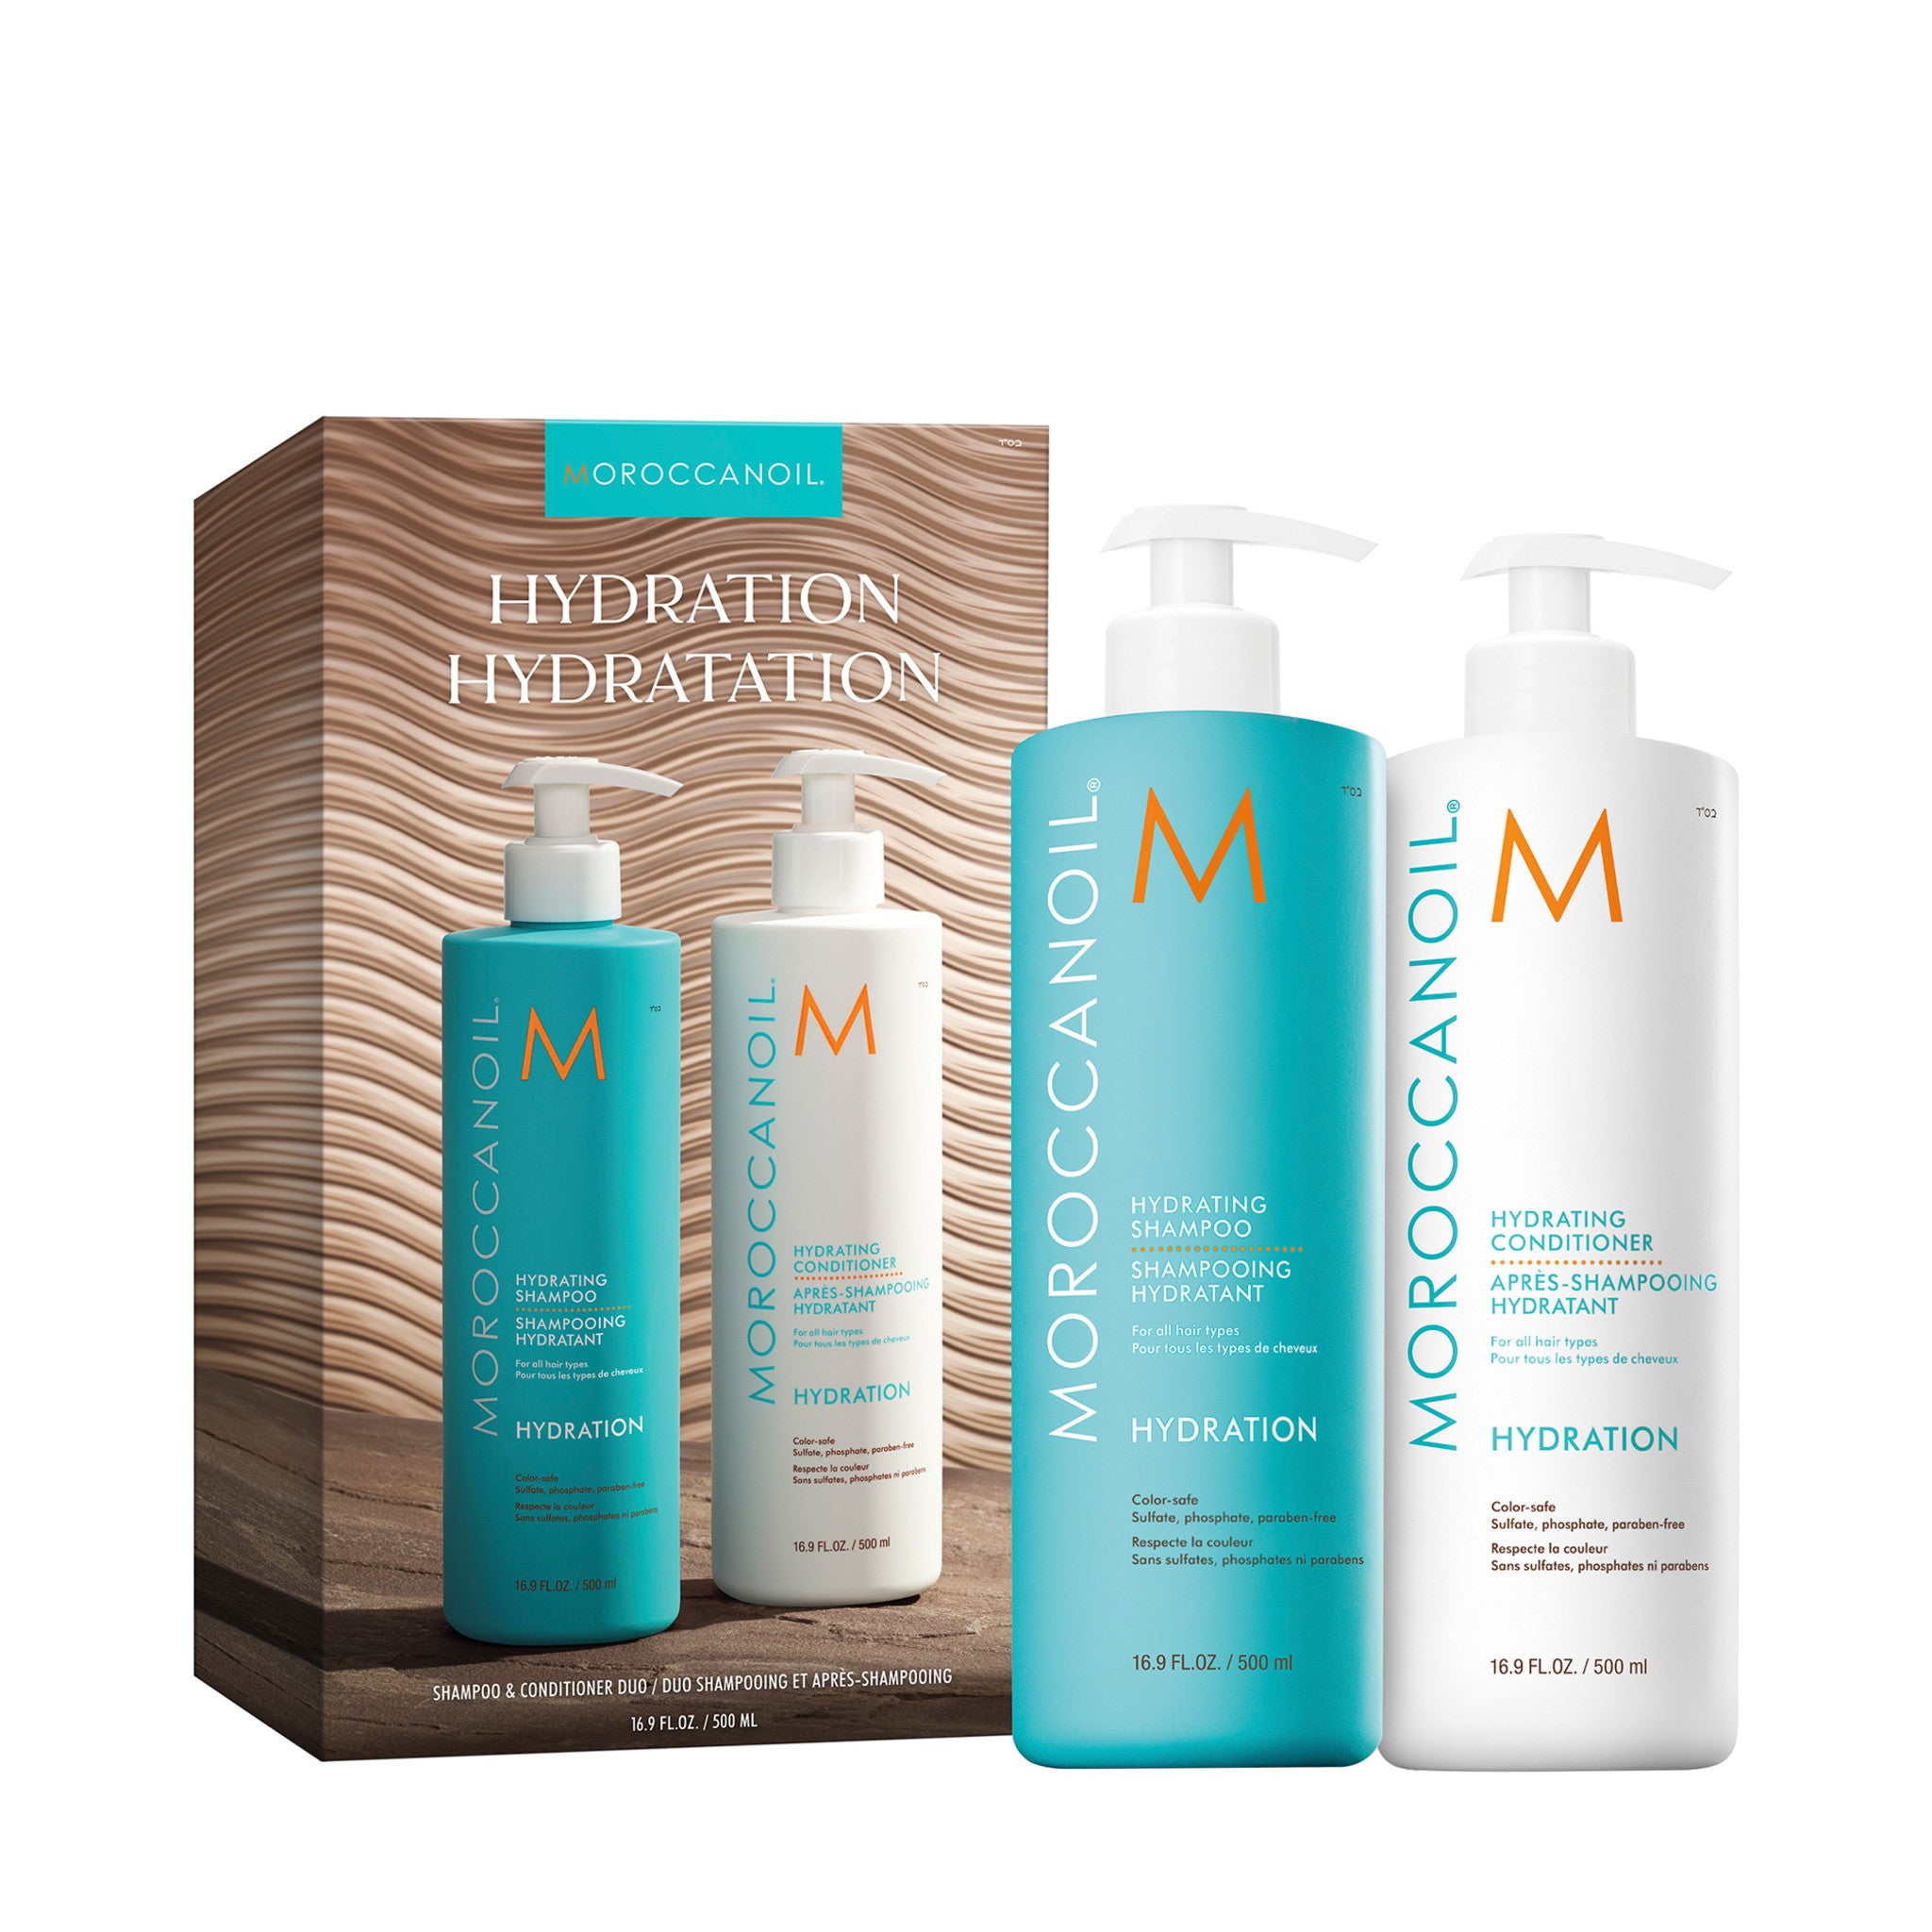 Moroccanoil Hydrating Shampoo and Conditioner Duo main image.